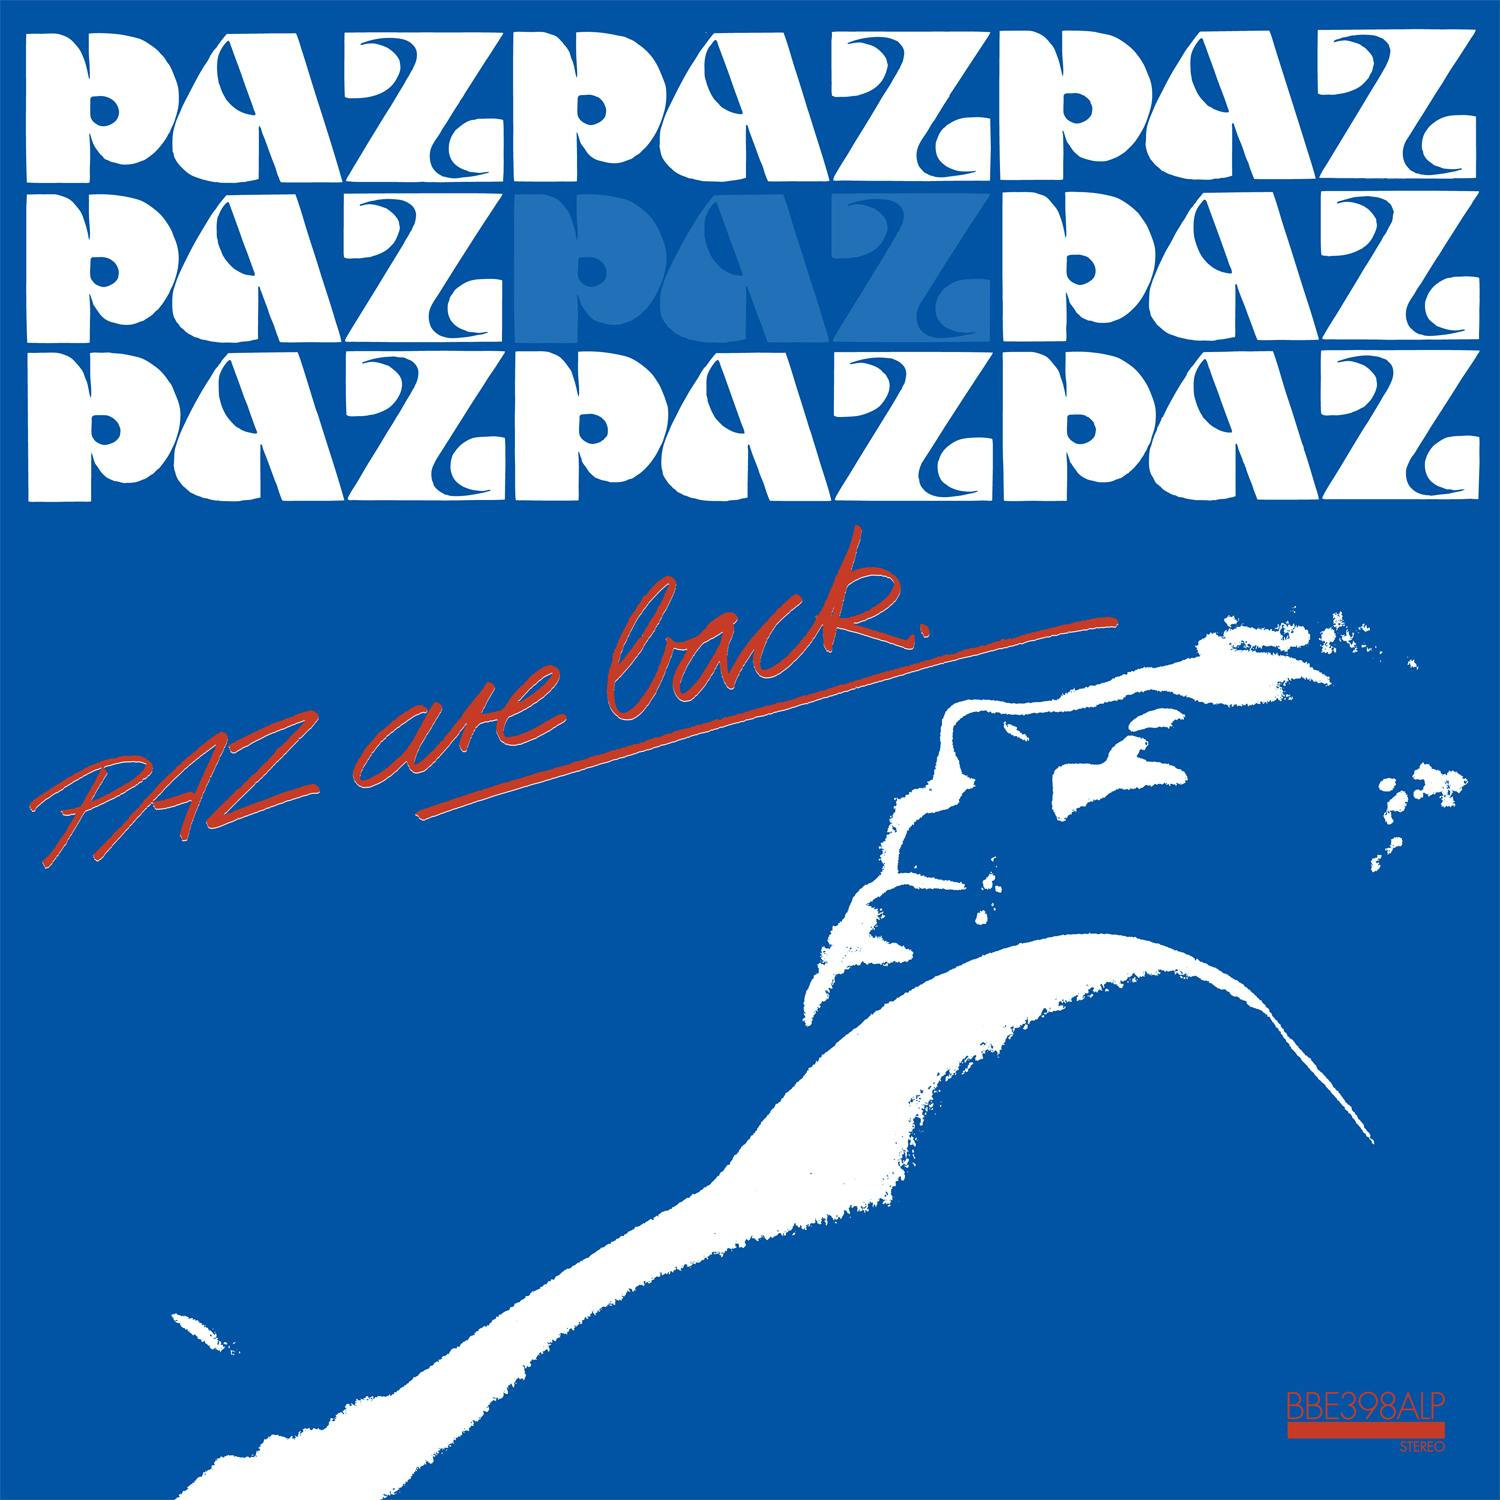 Paz Are Back: vinyl album available on BBE Music